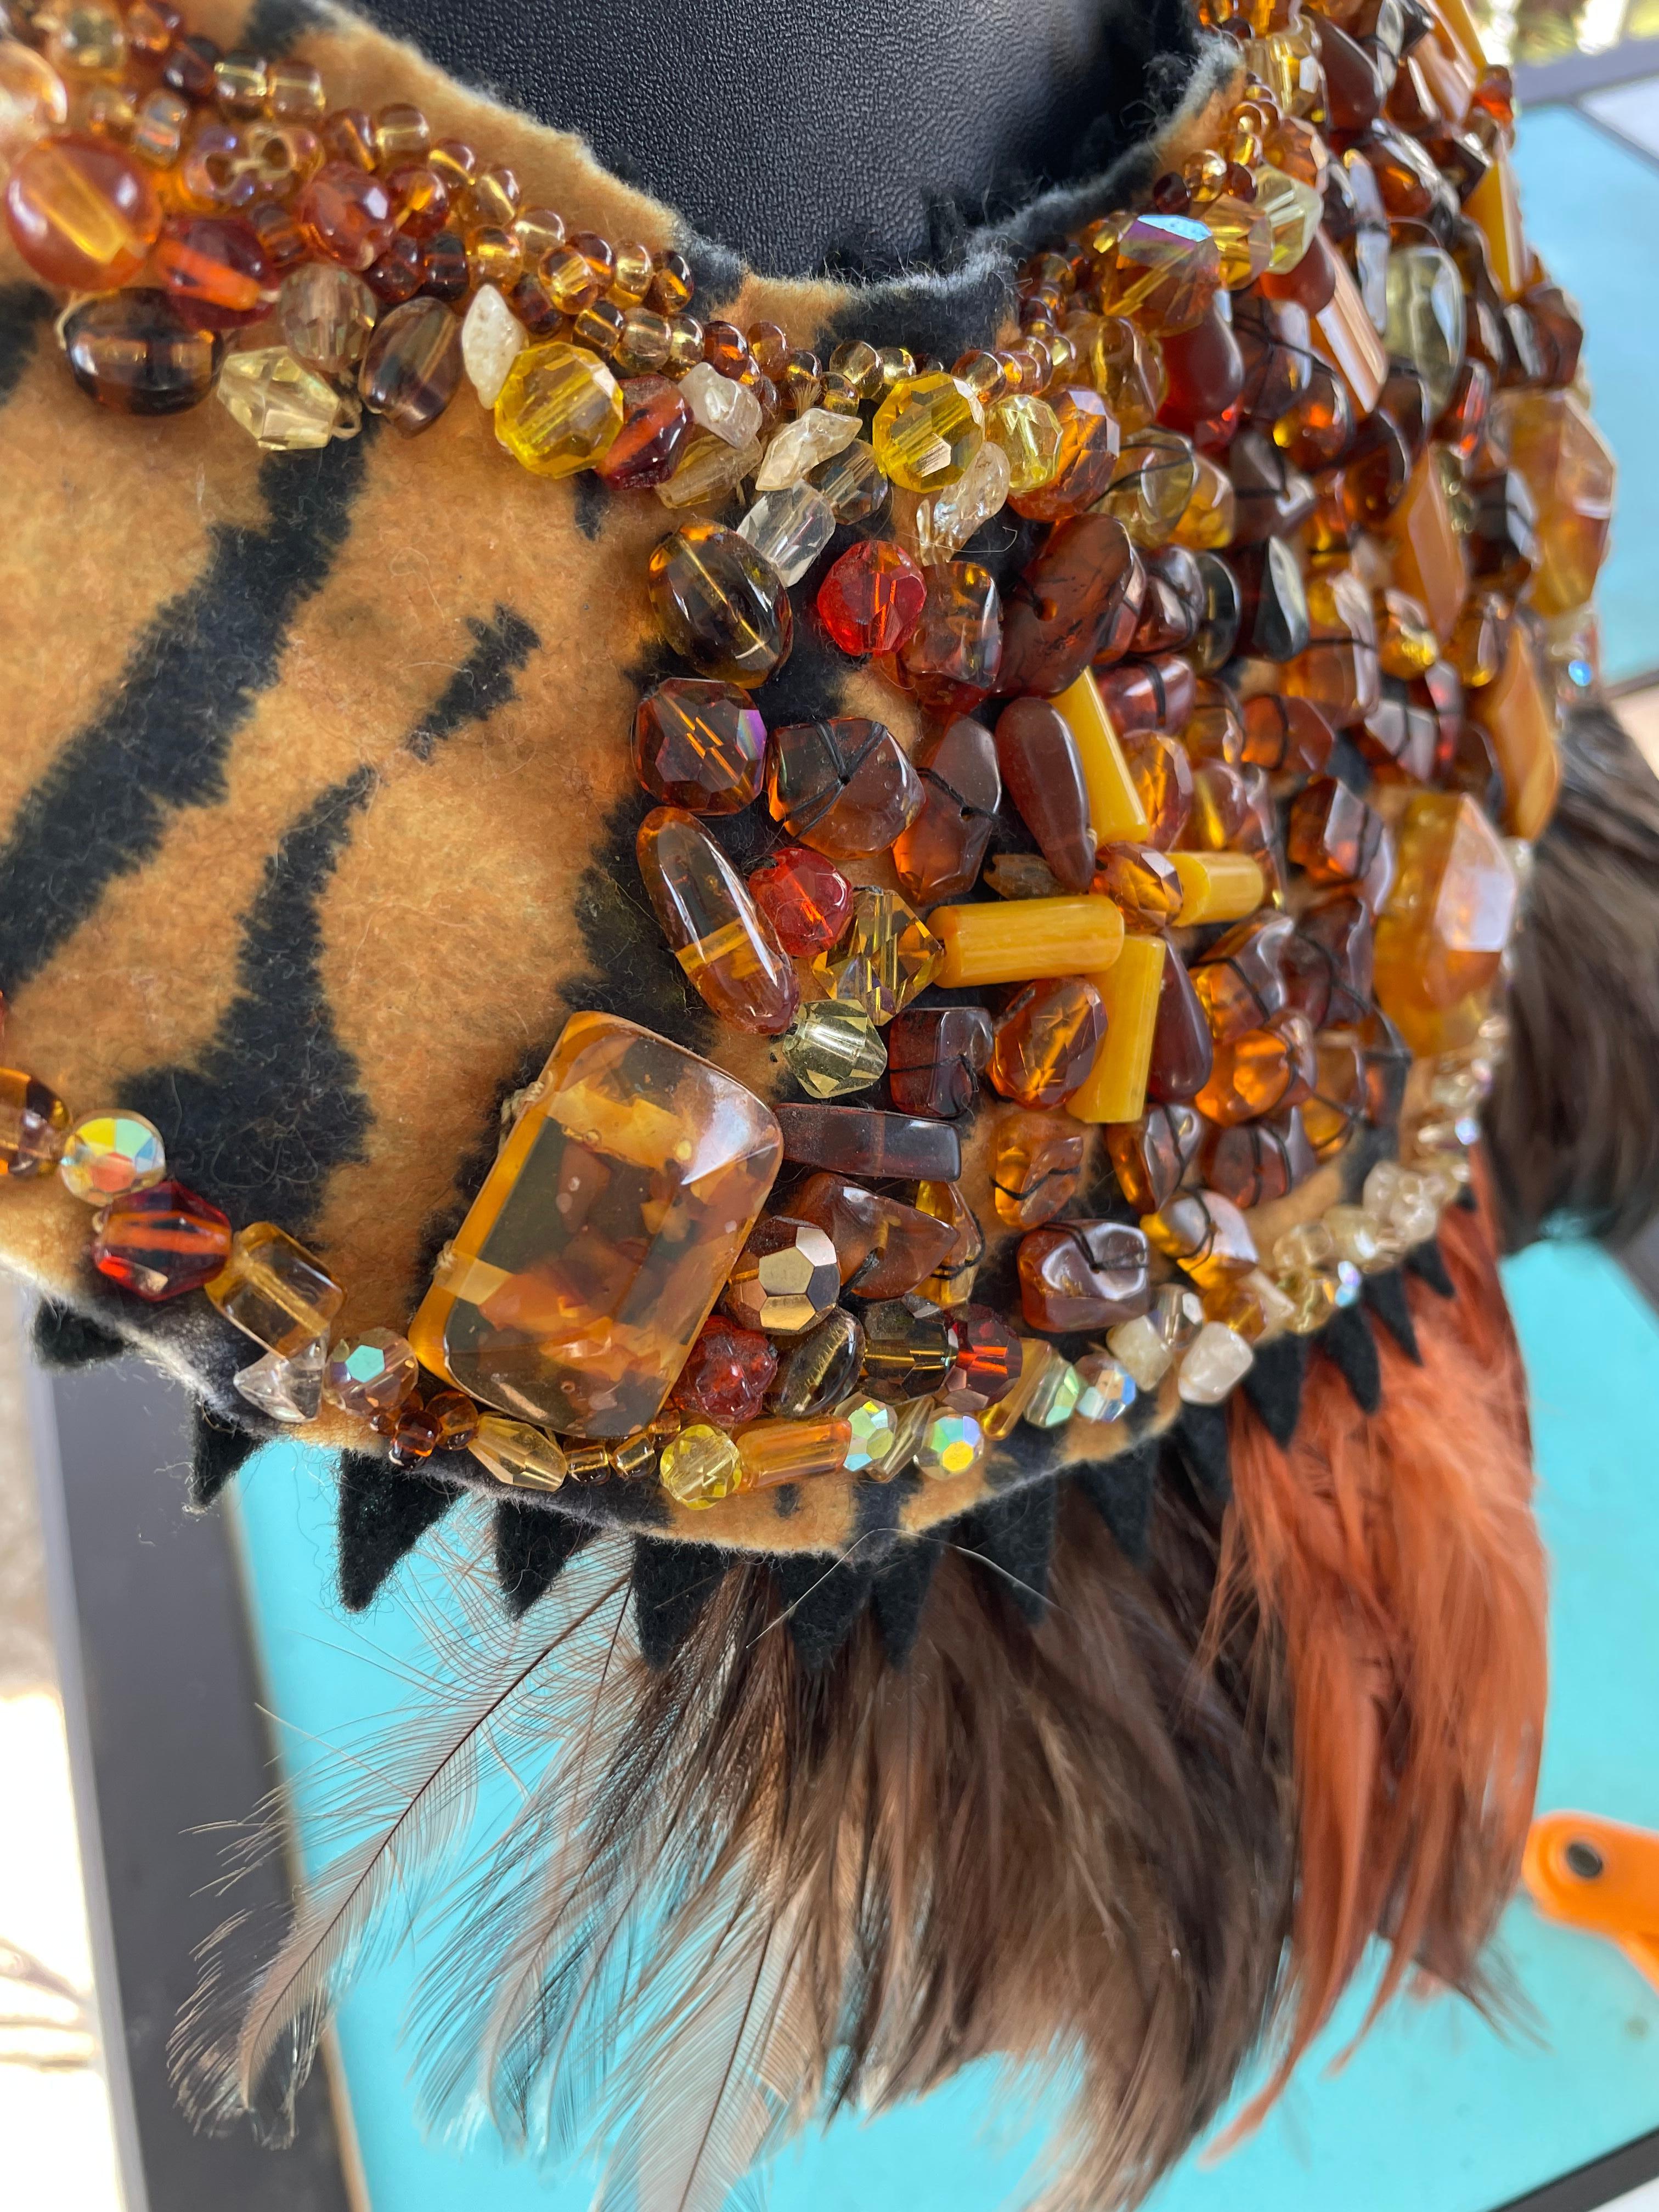 Handmade,one of a kind ,statement,Ethnic style beaded collar necklace from Lorraine’s Bijoux is on offer. All beads and stones are hand sewn onto wool felt in a tiger print and there is a sawtooth black felt edging around the perimeter. The stones